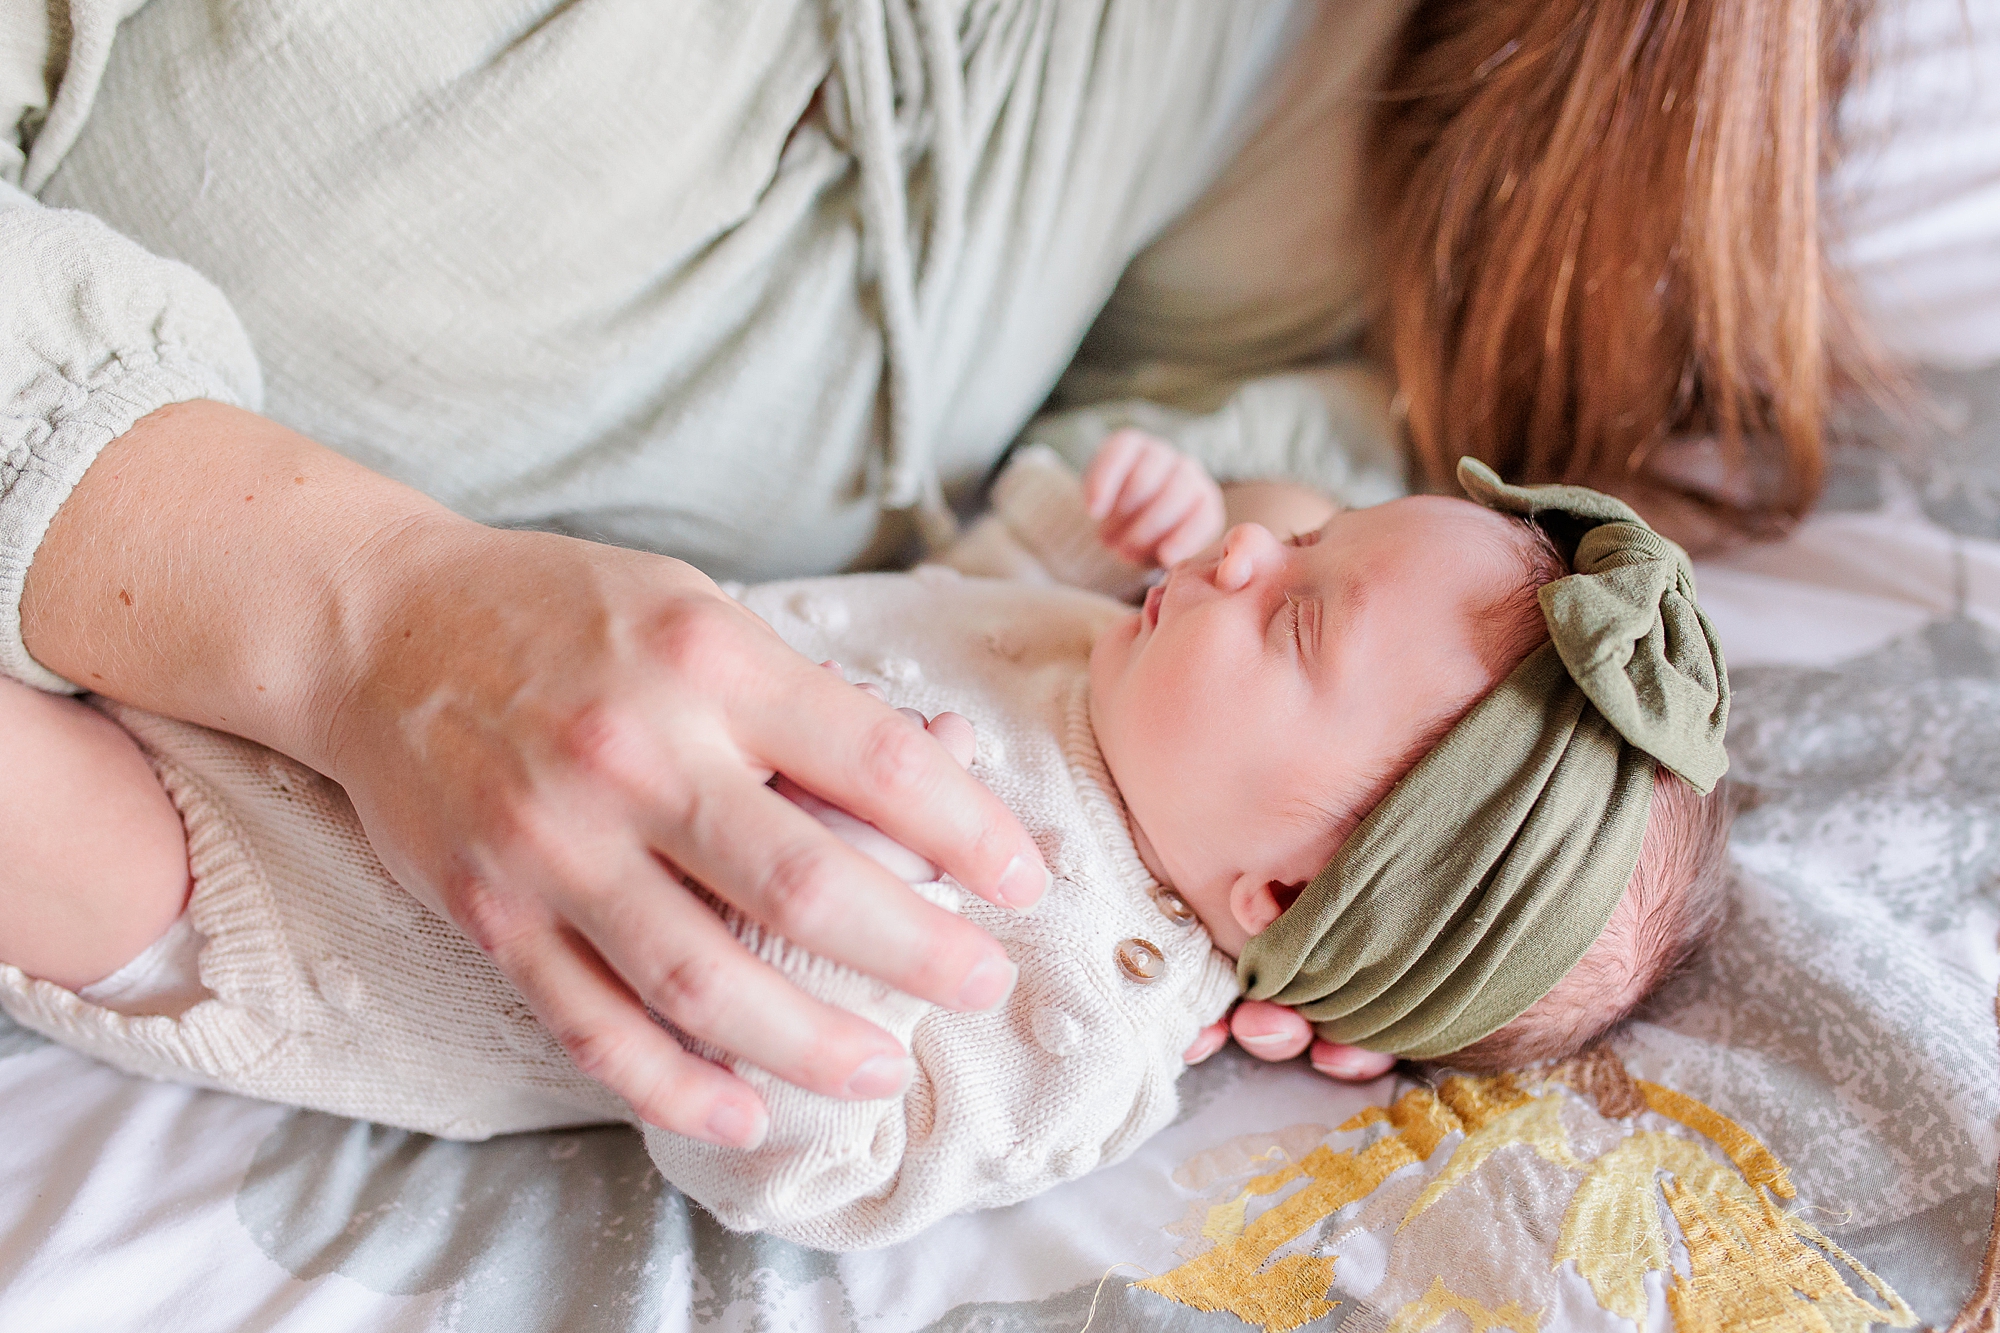 Christina Tundo Photography shares tips on when to book your newborn session based on the age of your baby